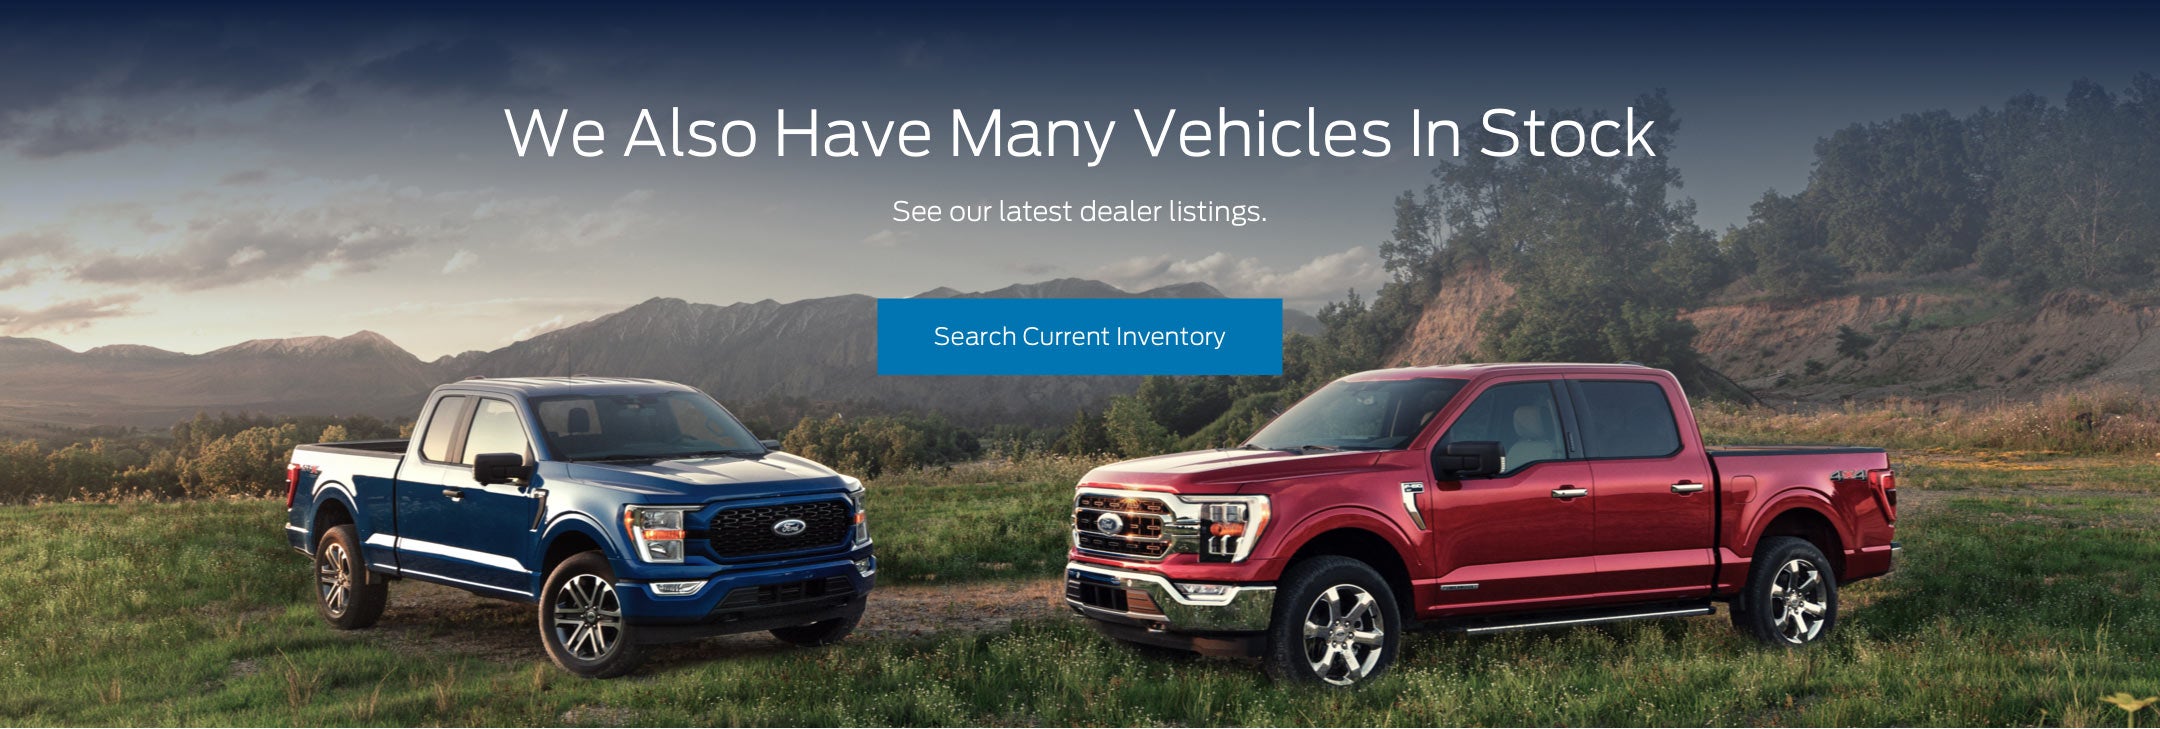 Ford vehicles in stock | Ewald's Hartford Ford in Hartford WI